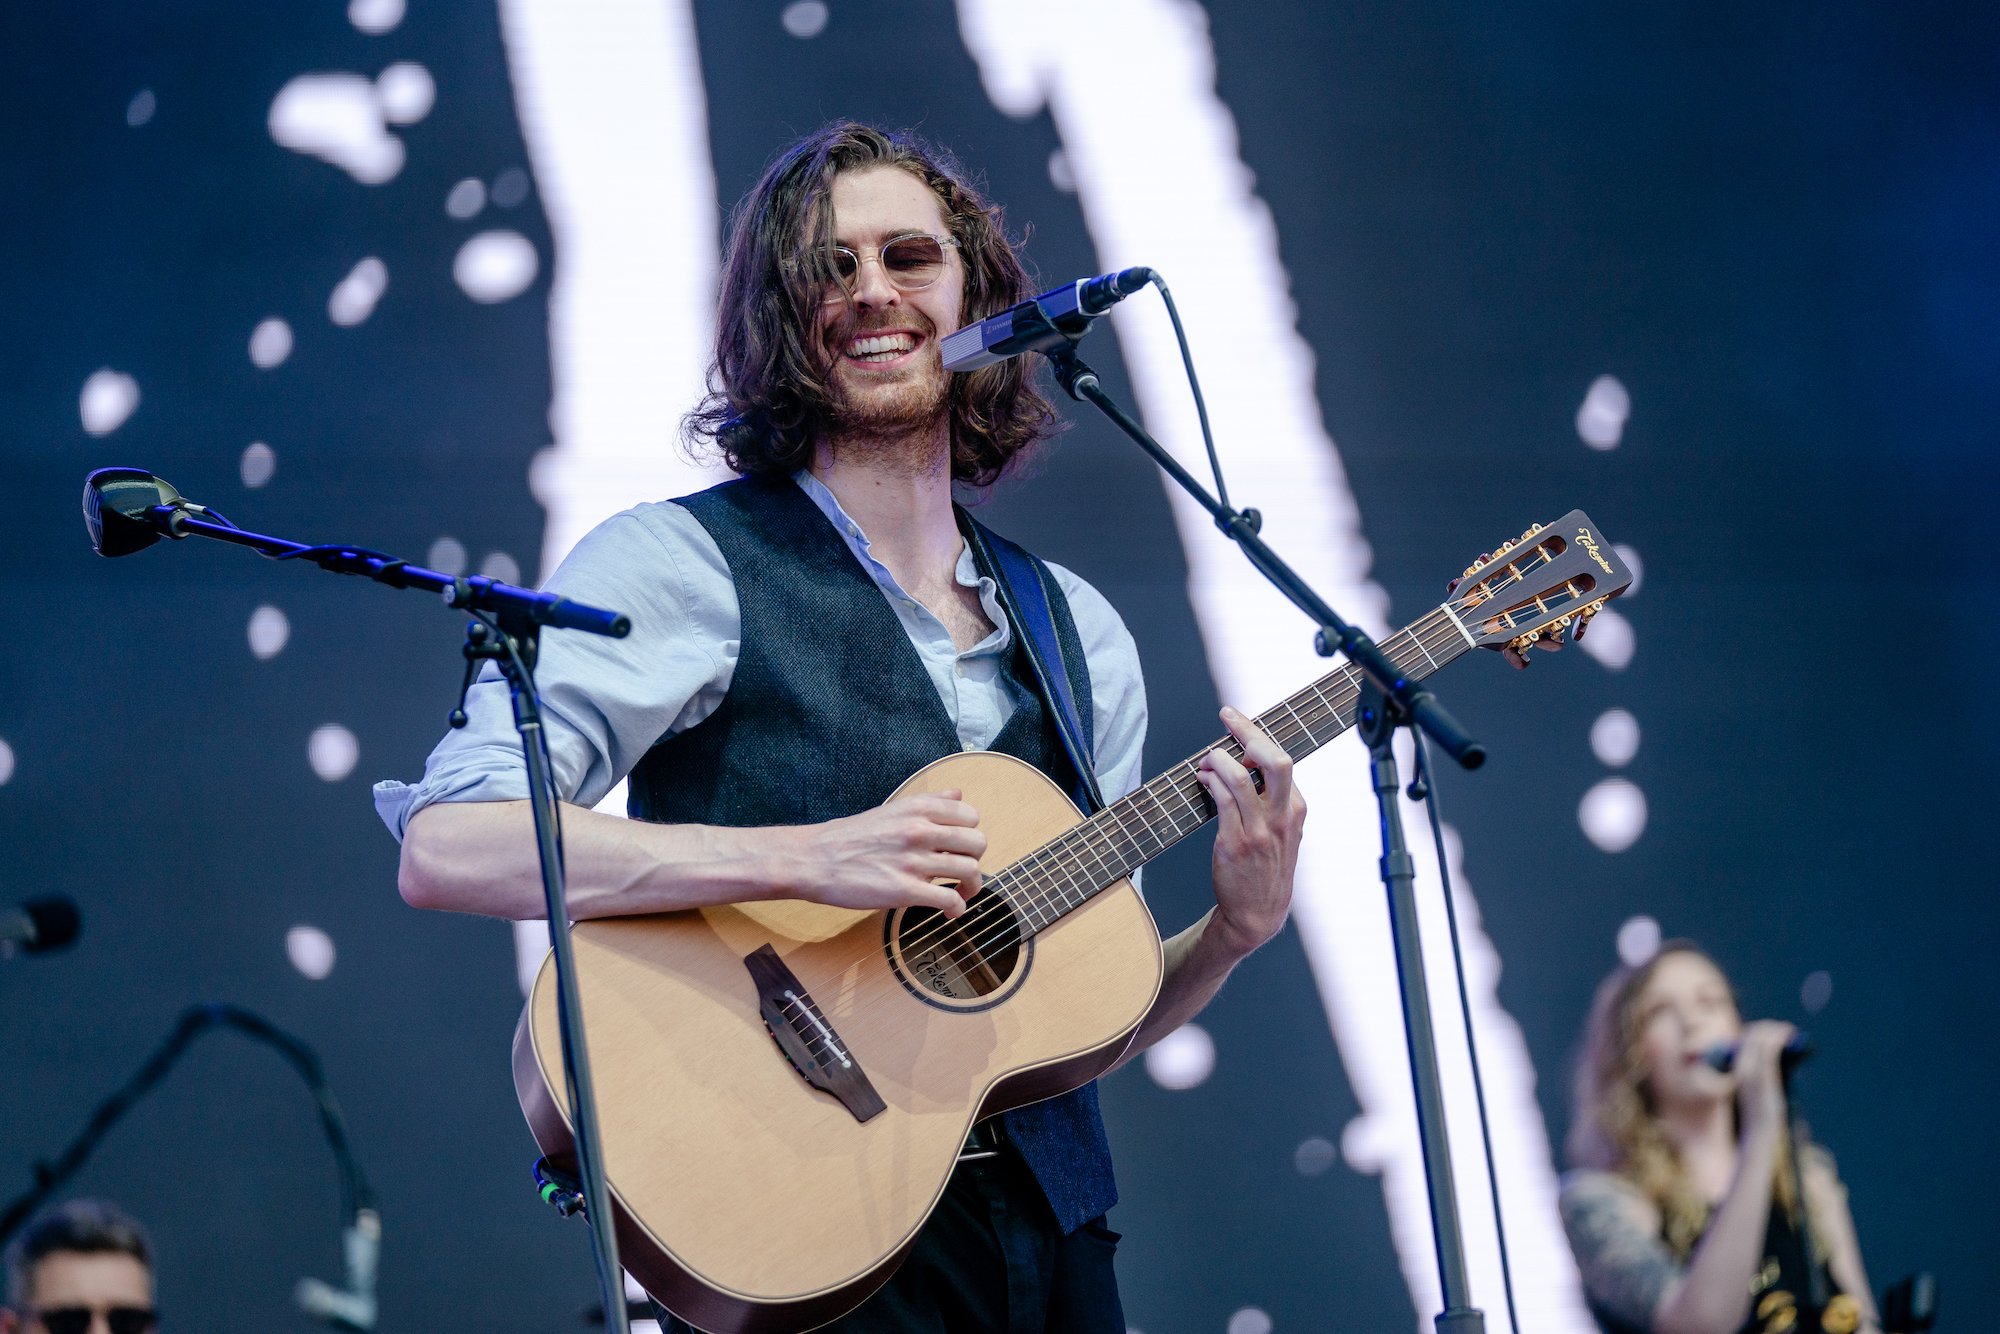 Hozier smiling, holding a guitar, on stage